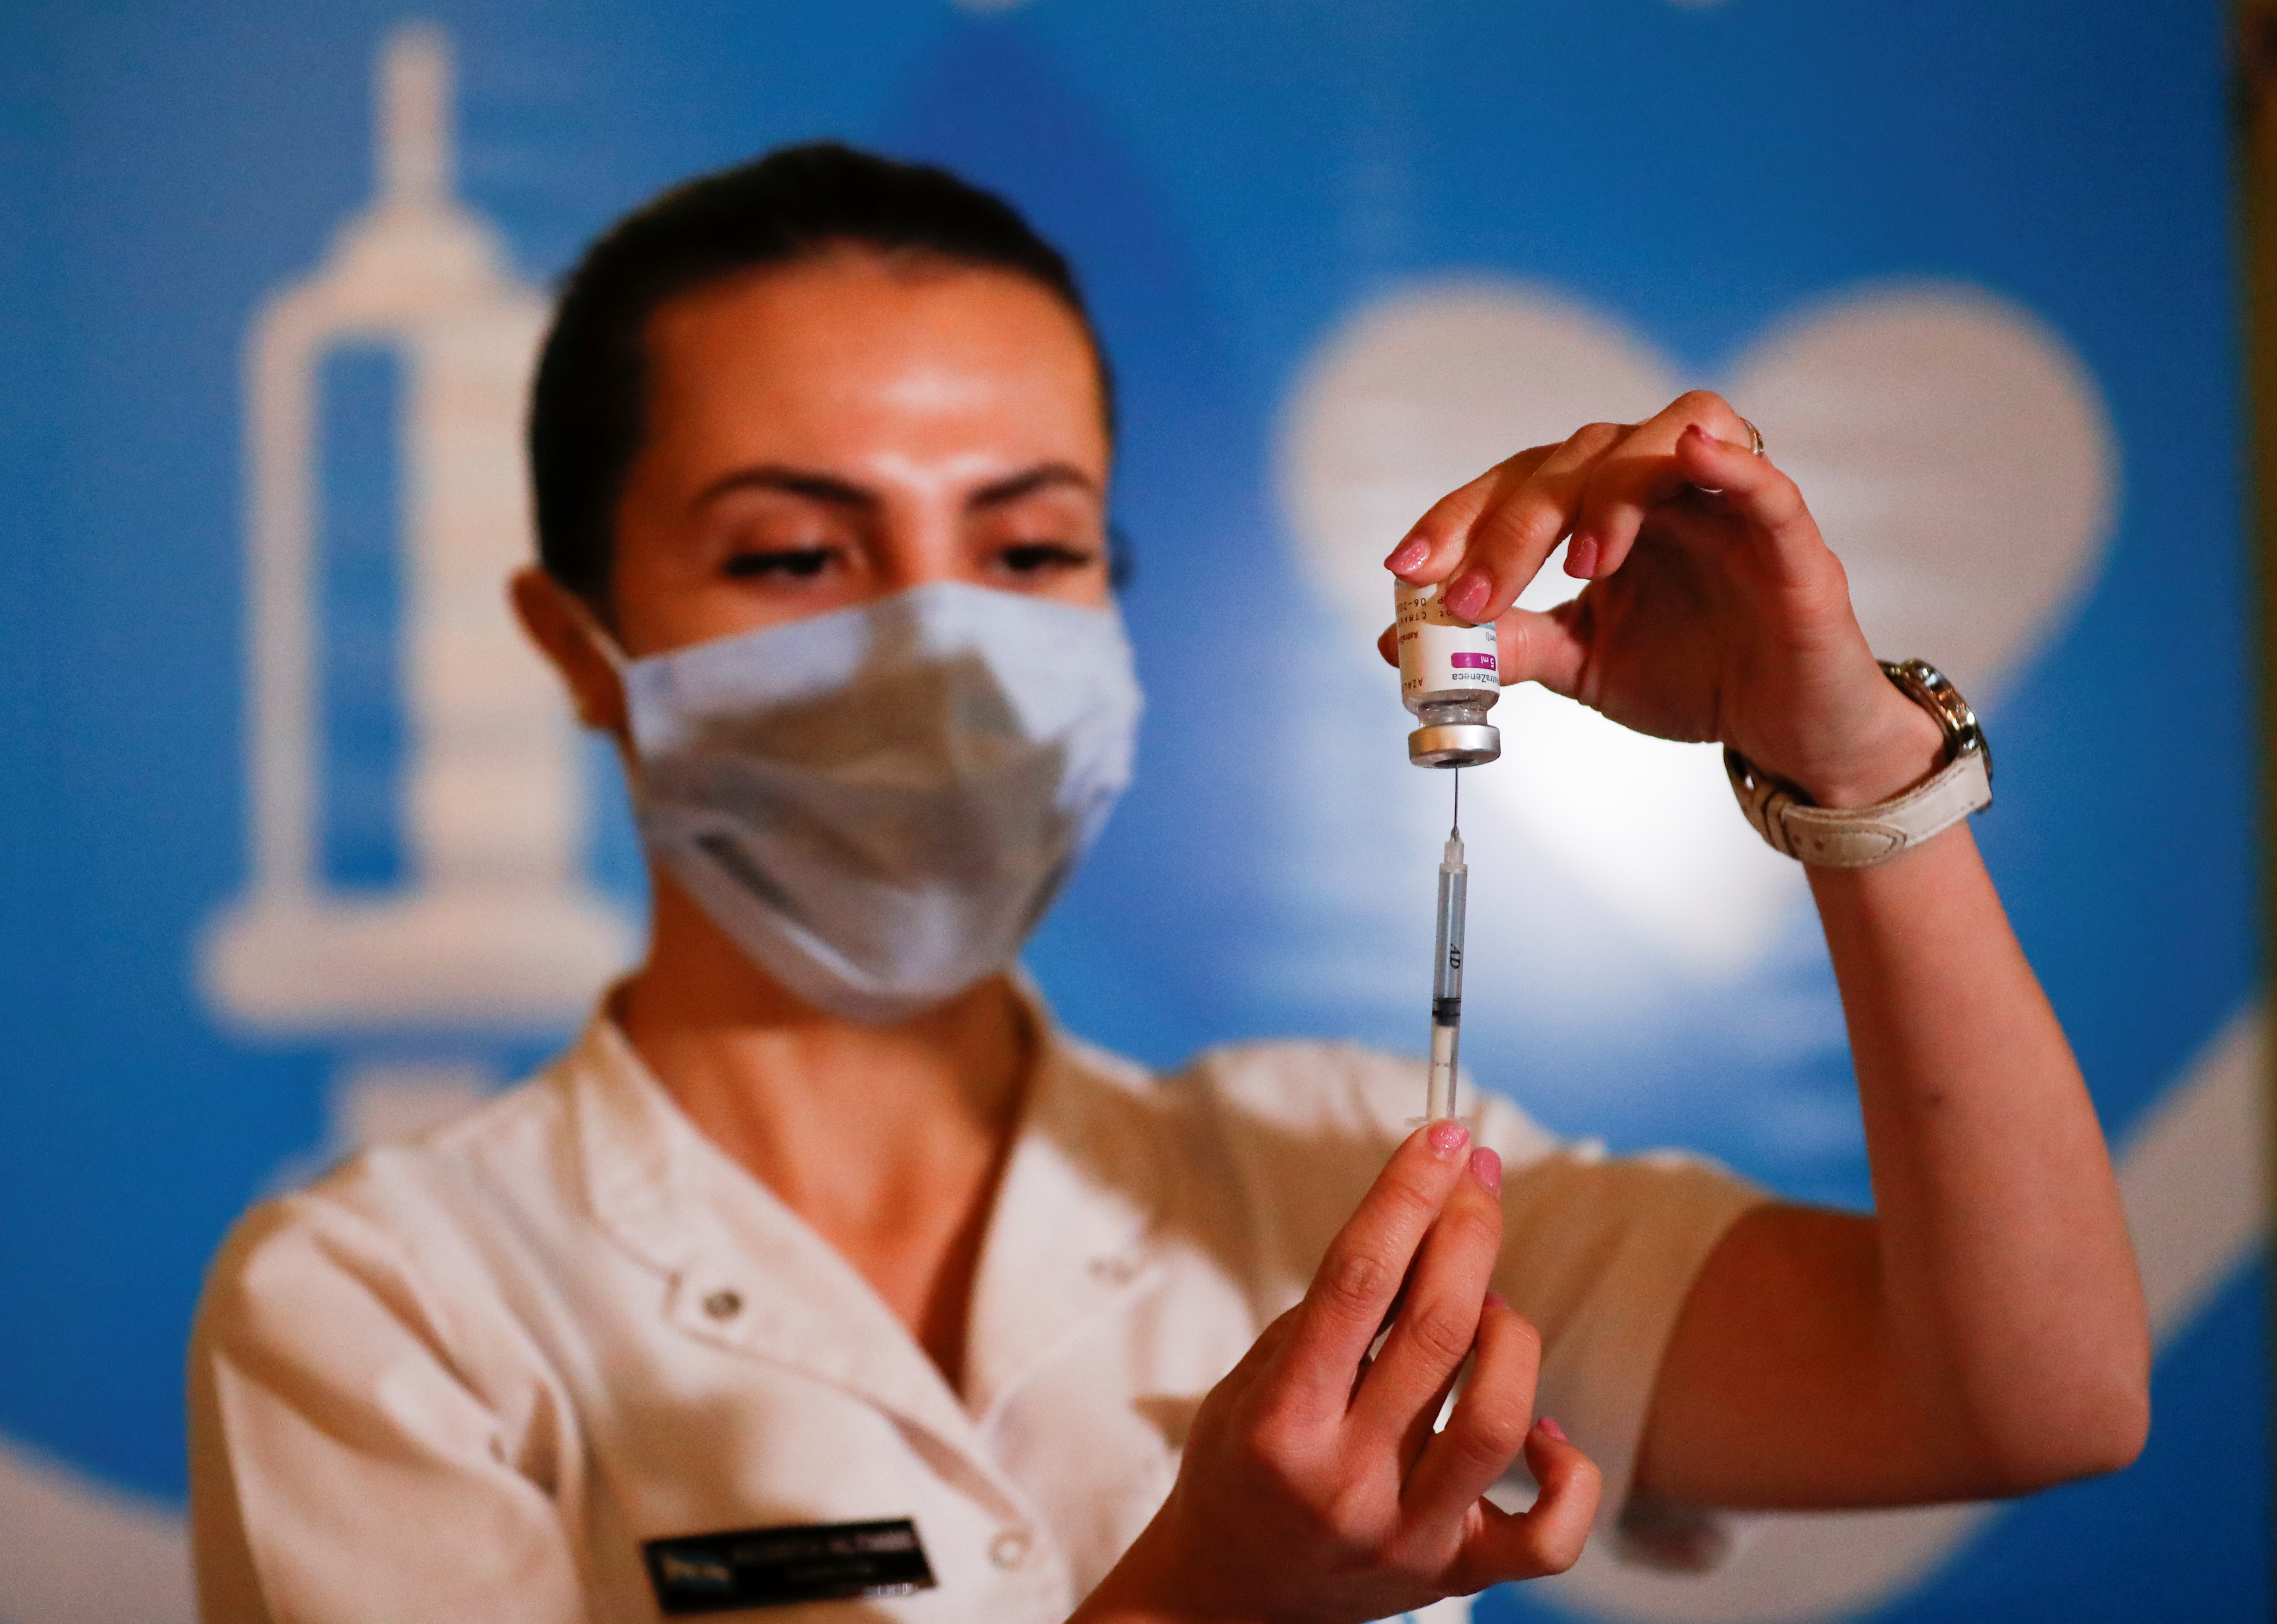 A member of the Armed Forces prepares a dose of the AstraZeneca coronavirus disease (COVID-19) vaccine obtained under the COVAX scheme, at the CCK Cultural Centre (Centro Cultural Kirchner), in Buenos Aires, Argentina June 15, 2021. REUTERS/Agustin Marcarian